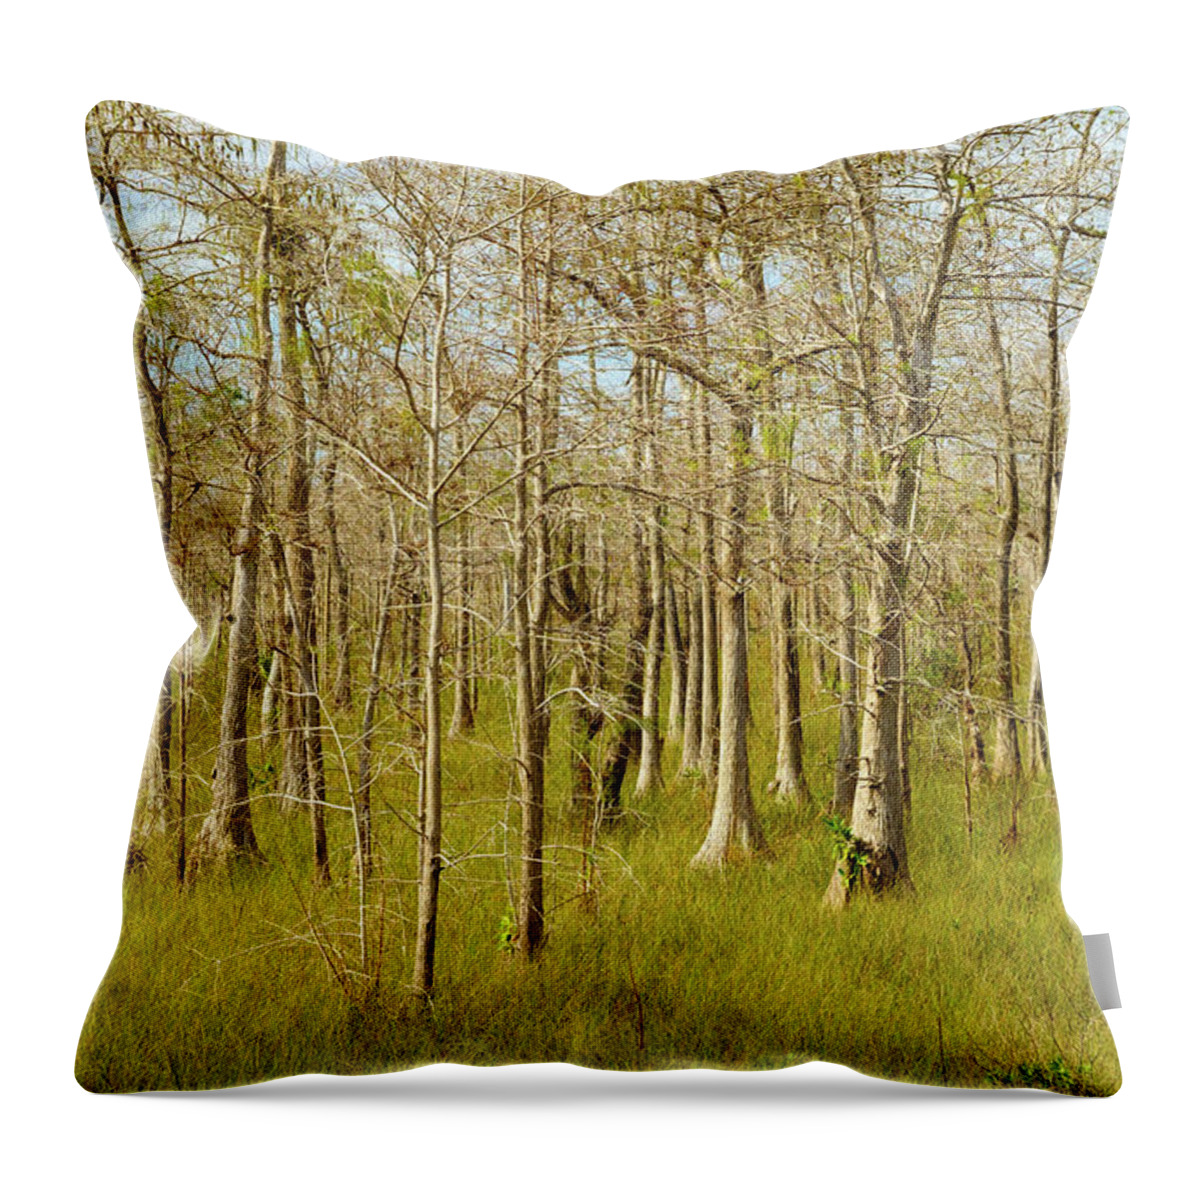 Big Cypress National Preserve Throw Pillow featuring the photograph Florida Everglades by Raul Rodriguez